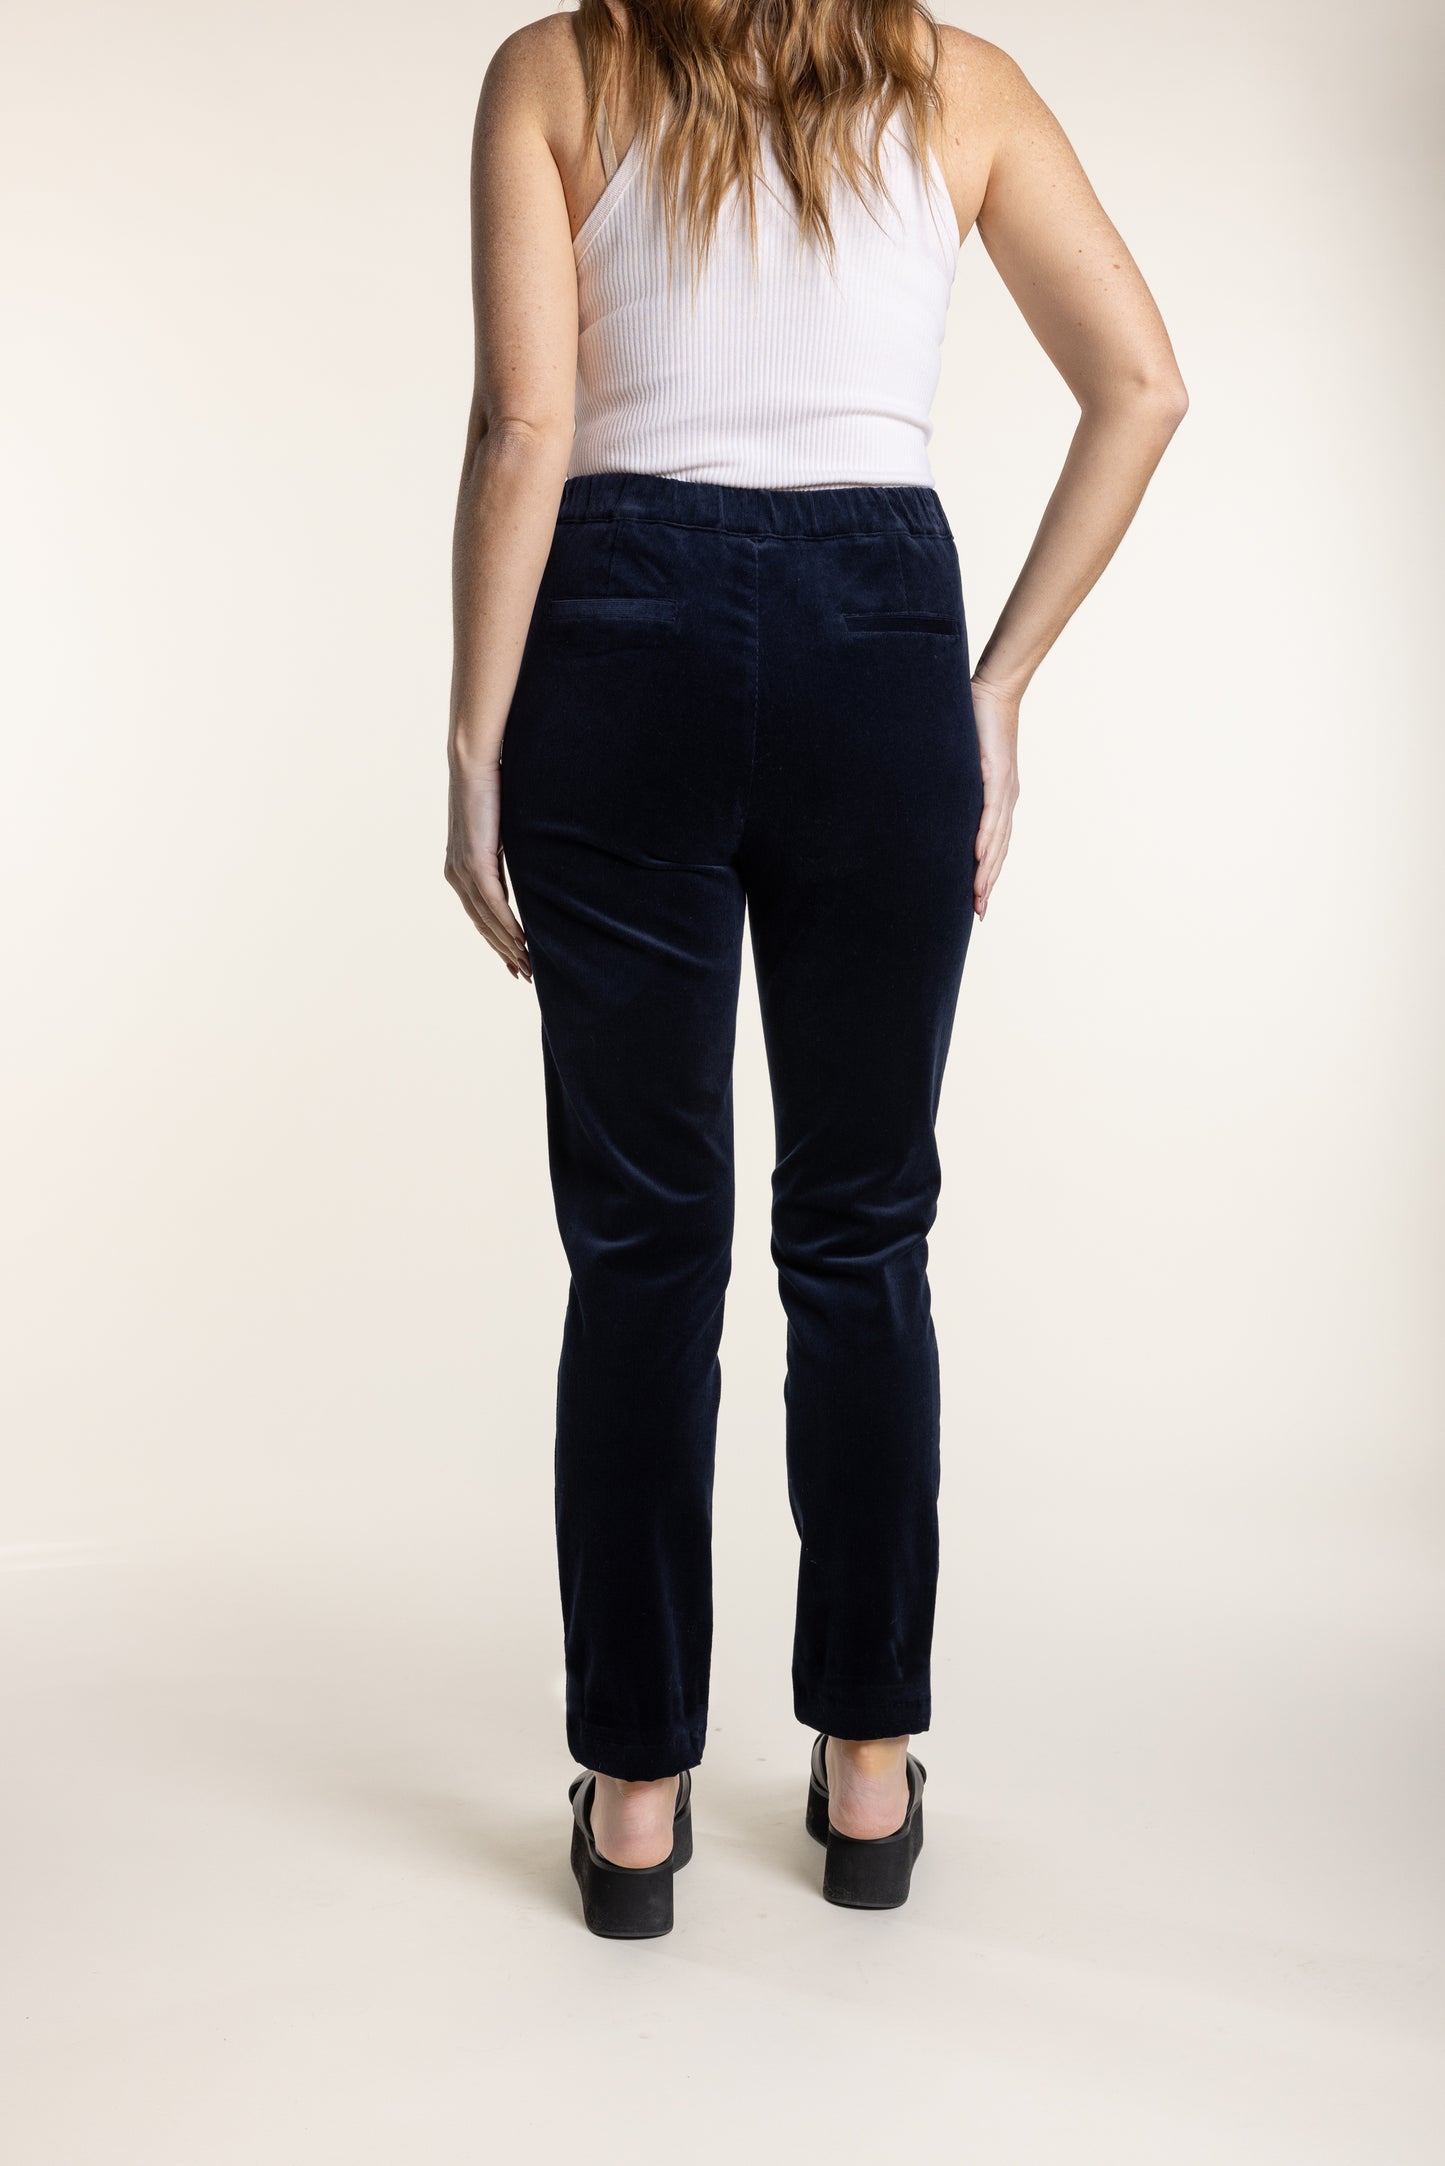 Two T's - Baby Cord Pant Navy | 2748